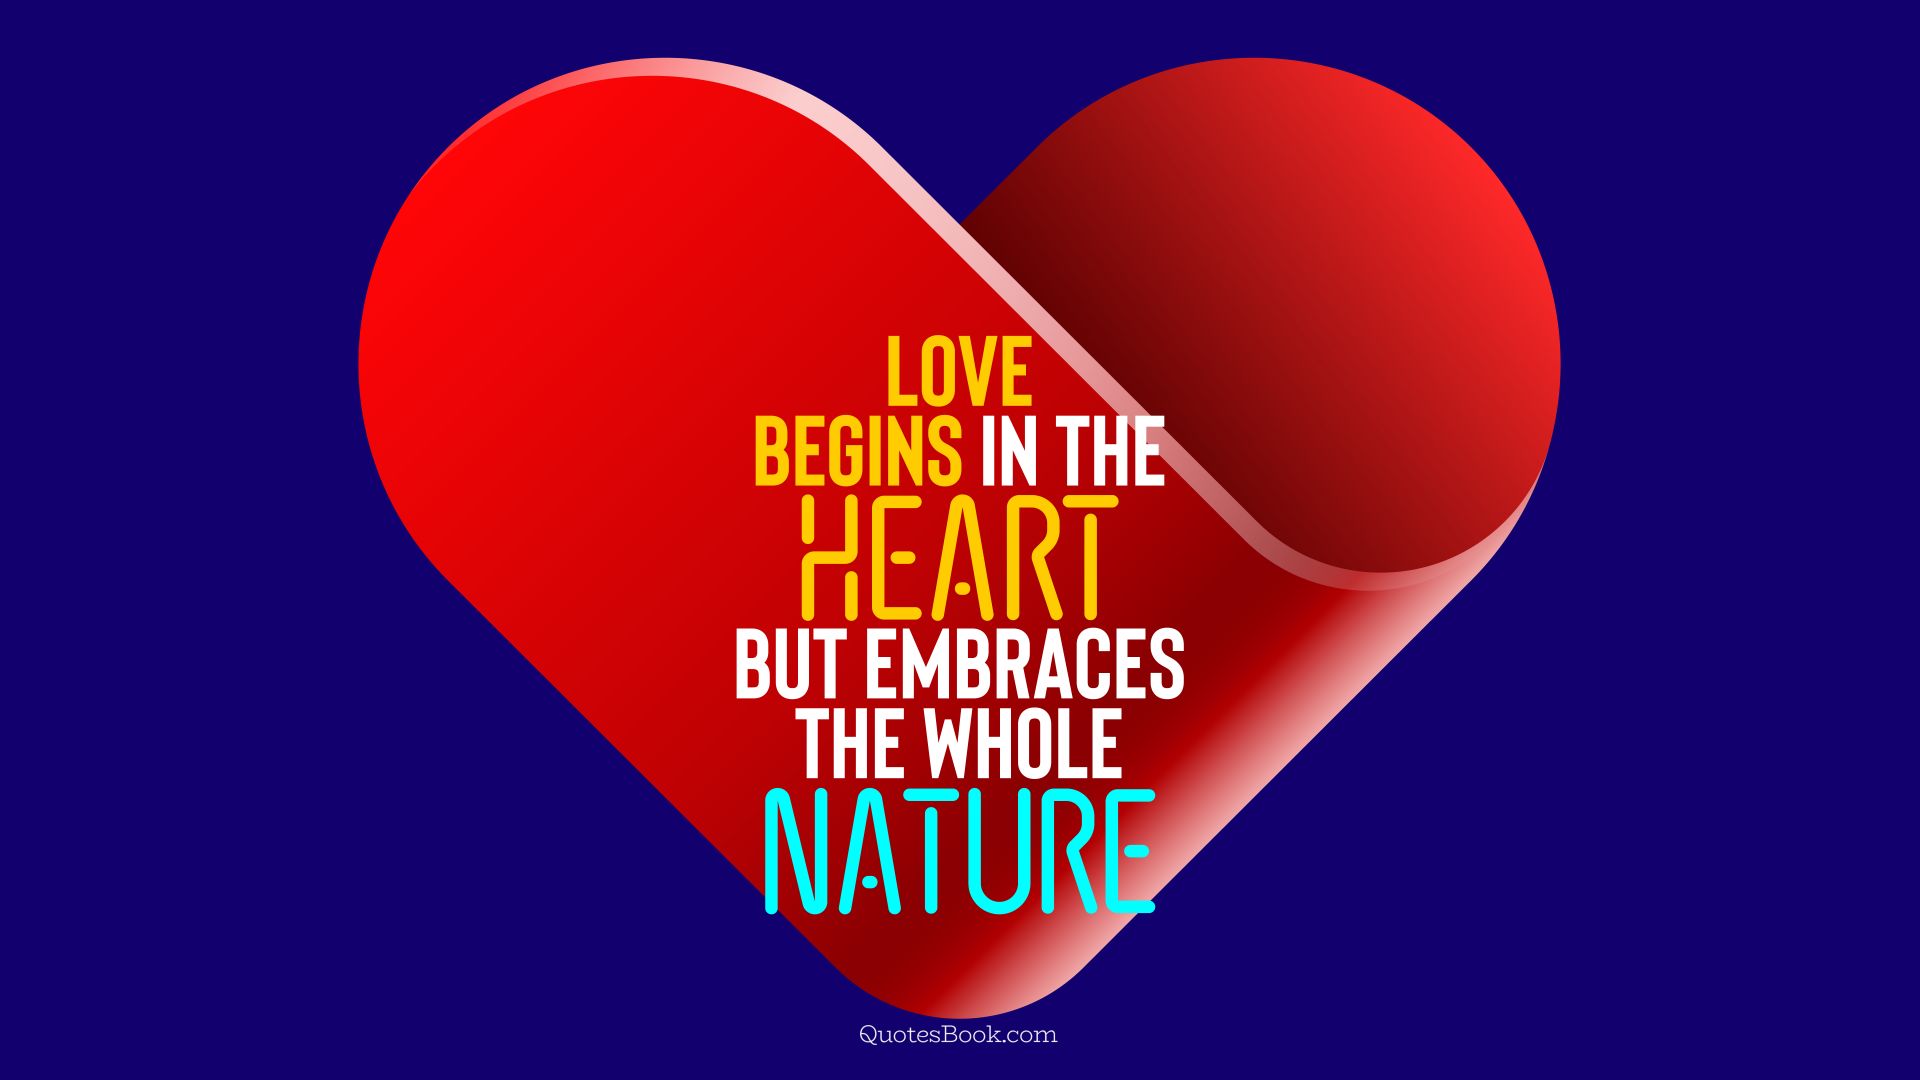 Love begins in the heart but embraces the whole nature. - Quote by QuotesBook